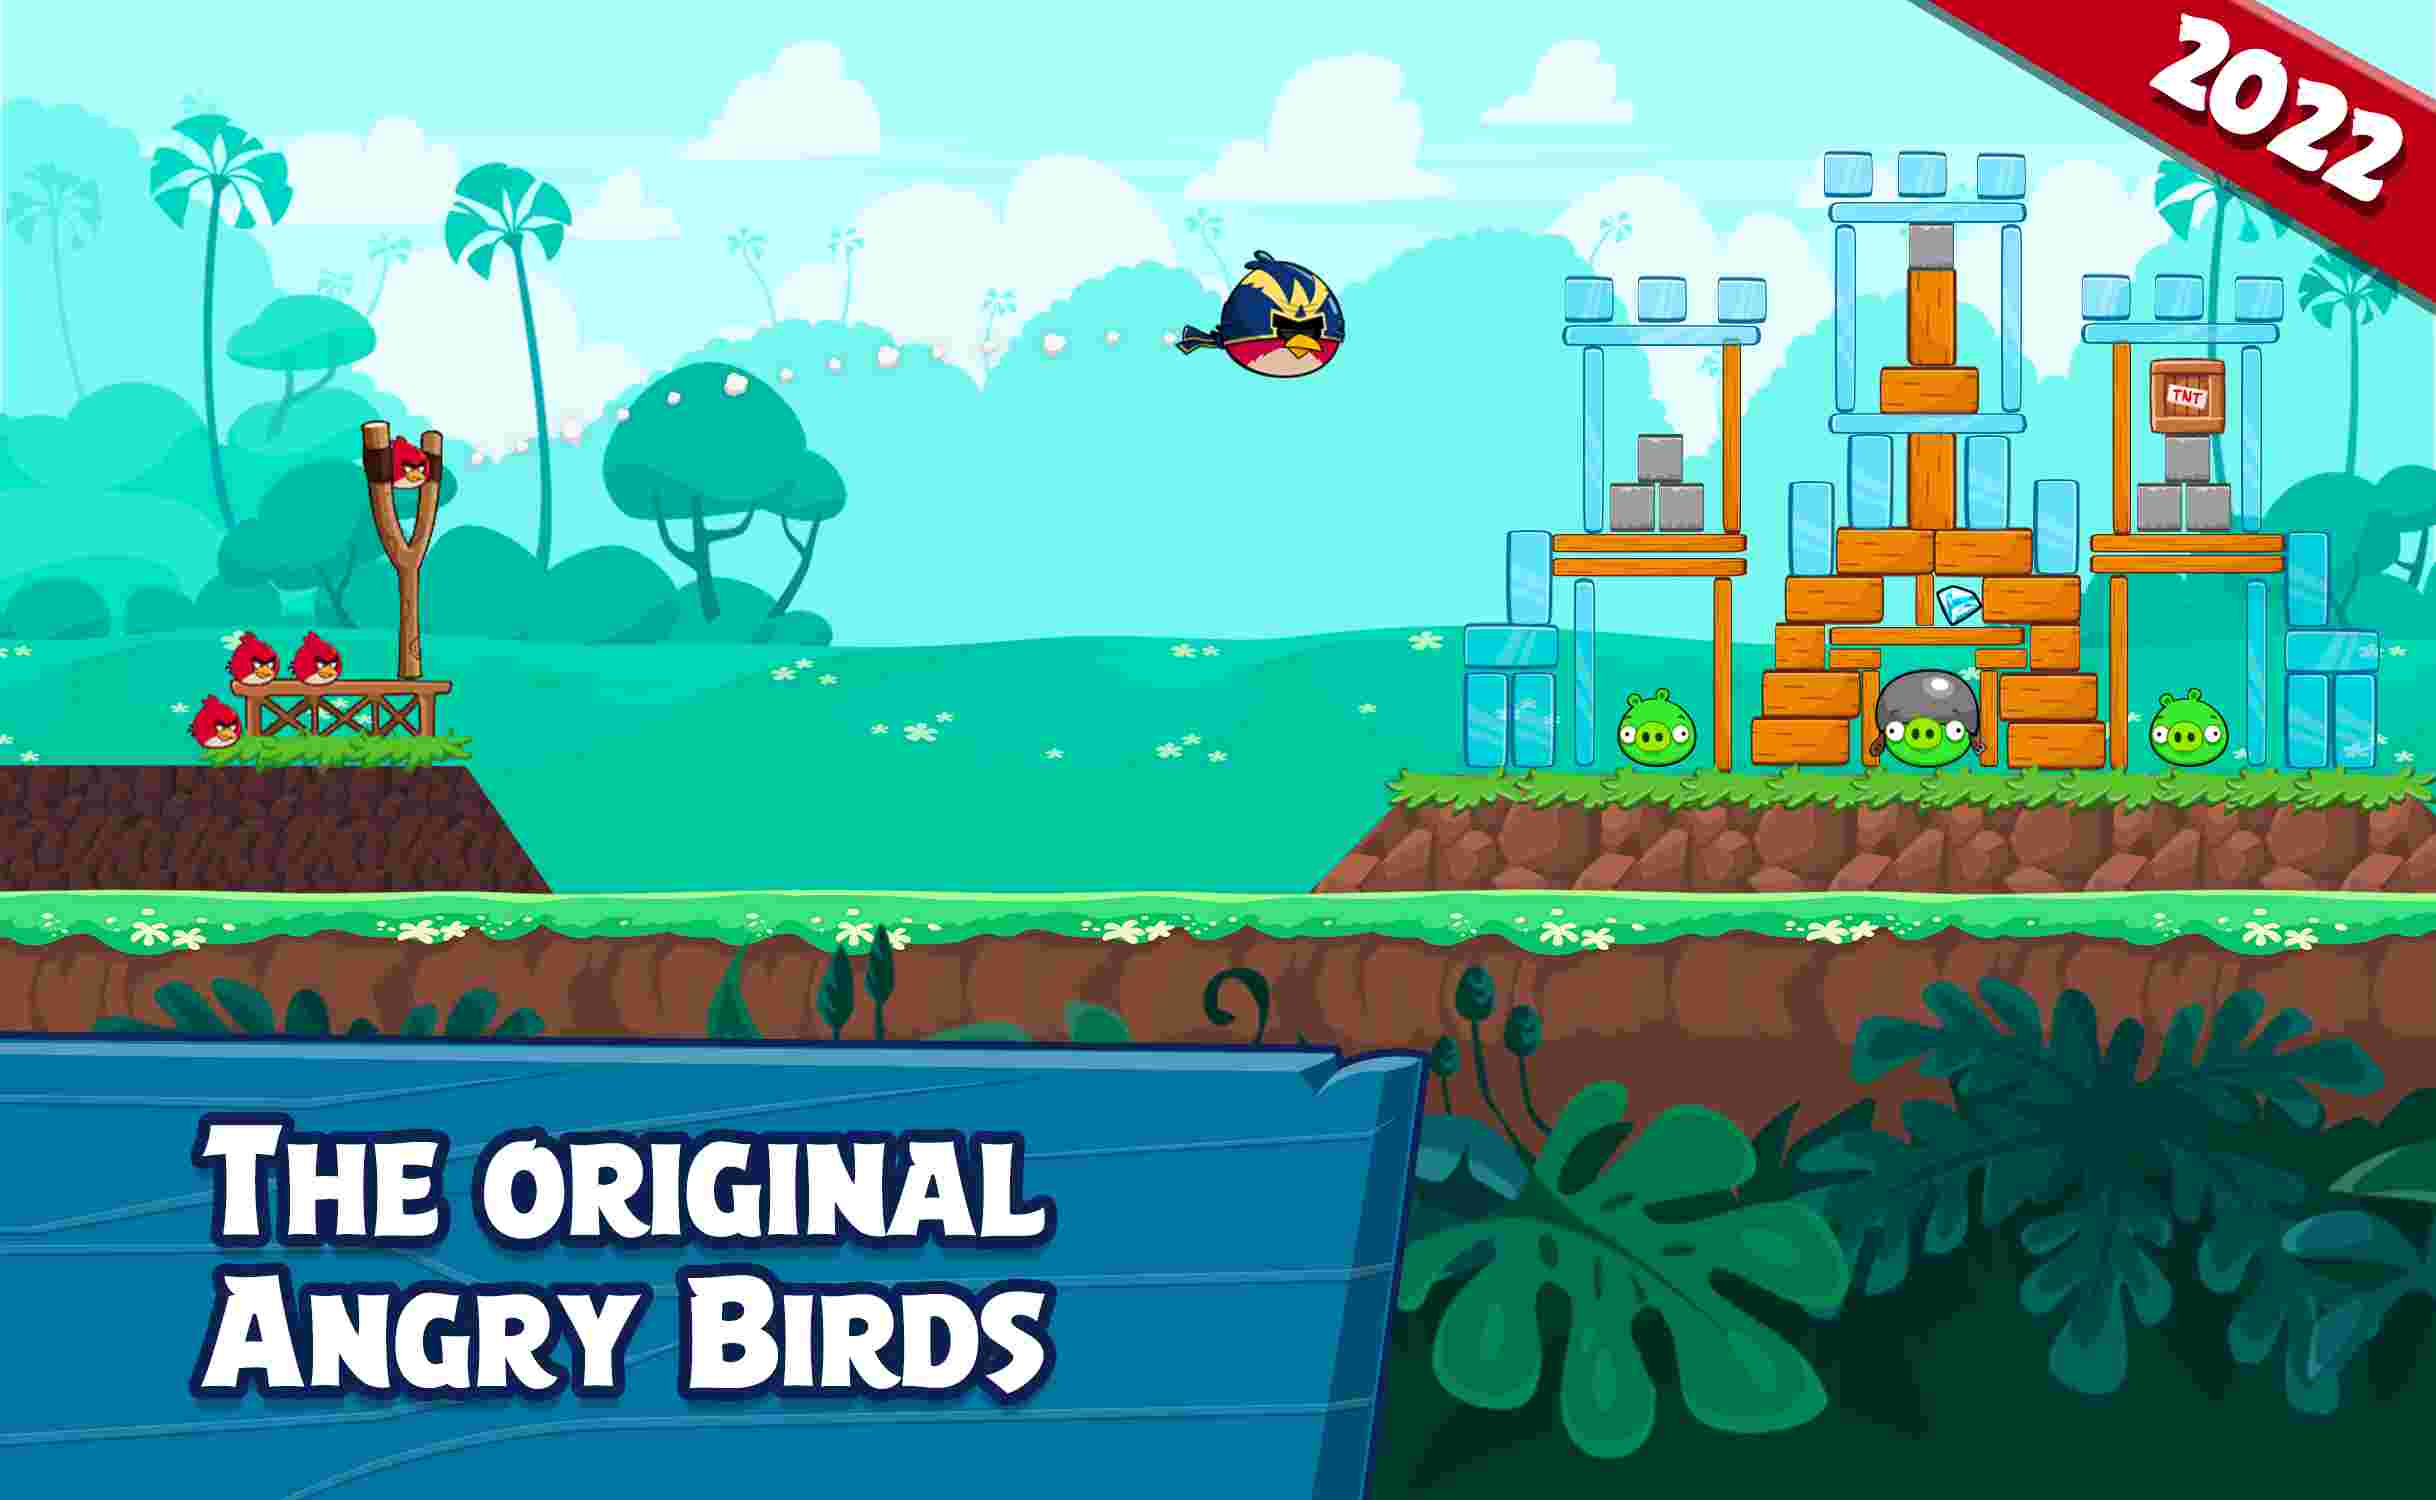 Angry Birds Friends 